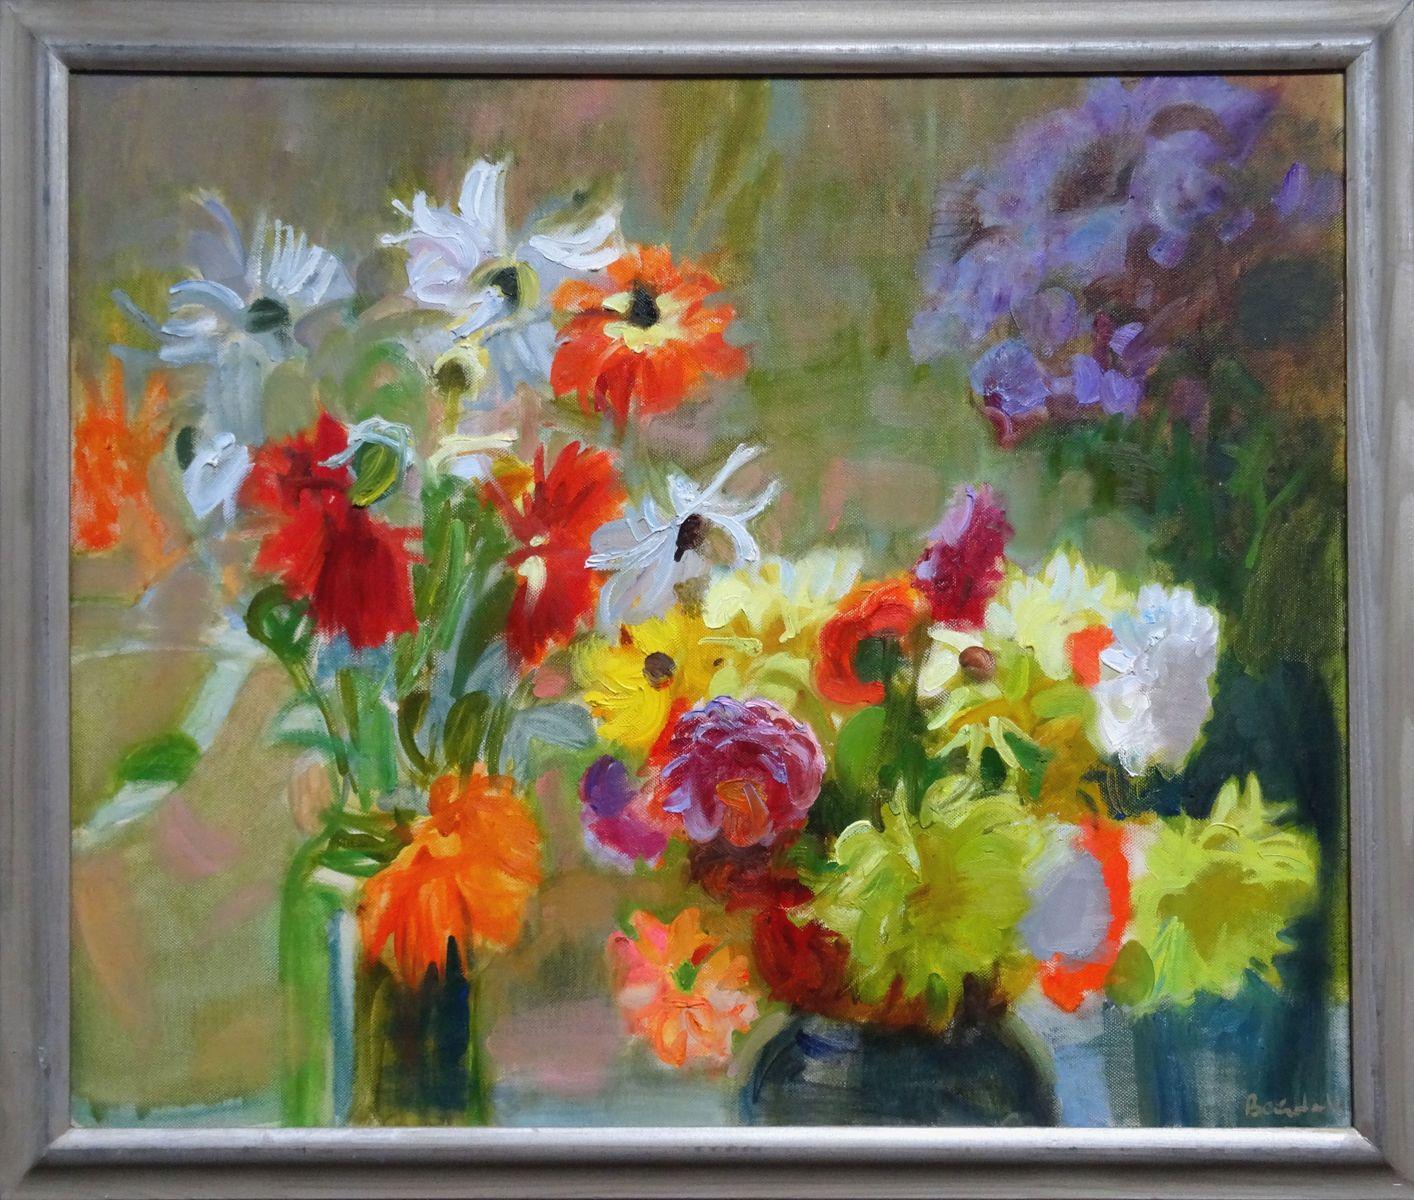 Autumn flowers. 2009. Oil on canvas, 54x65 cm - Painting by Valery Bayda 